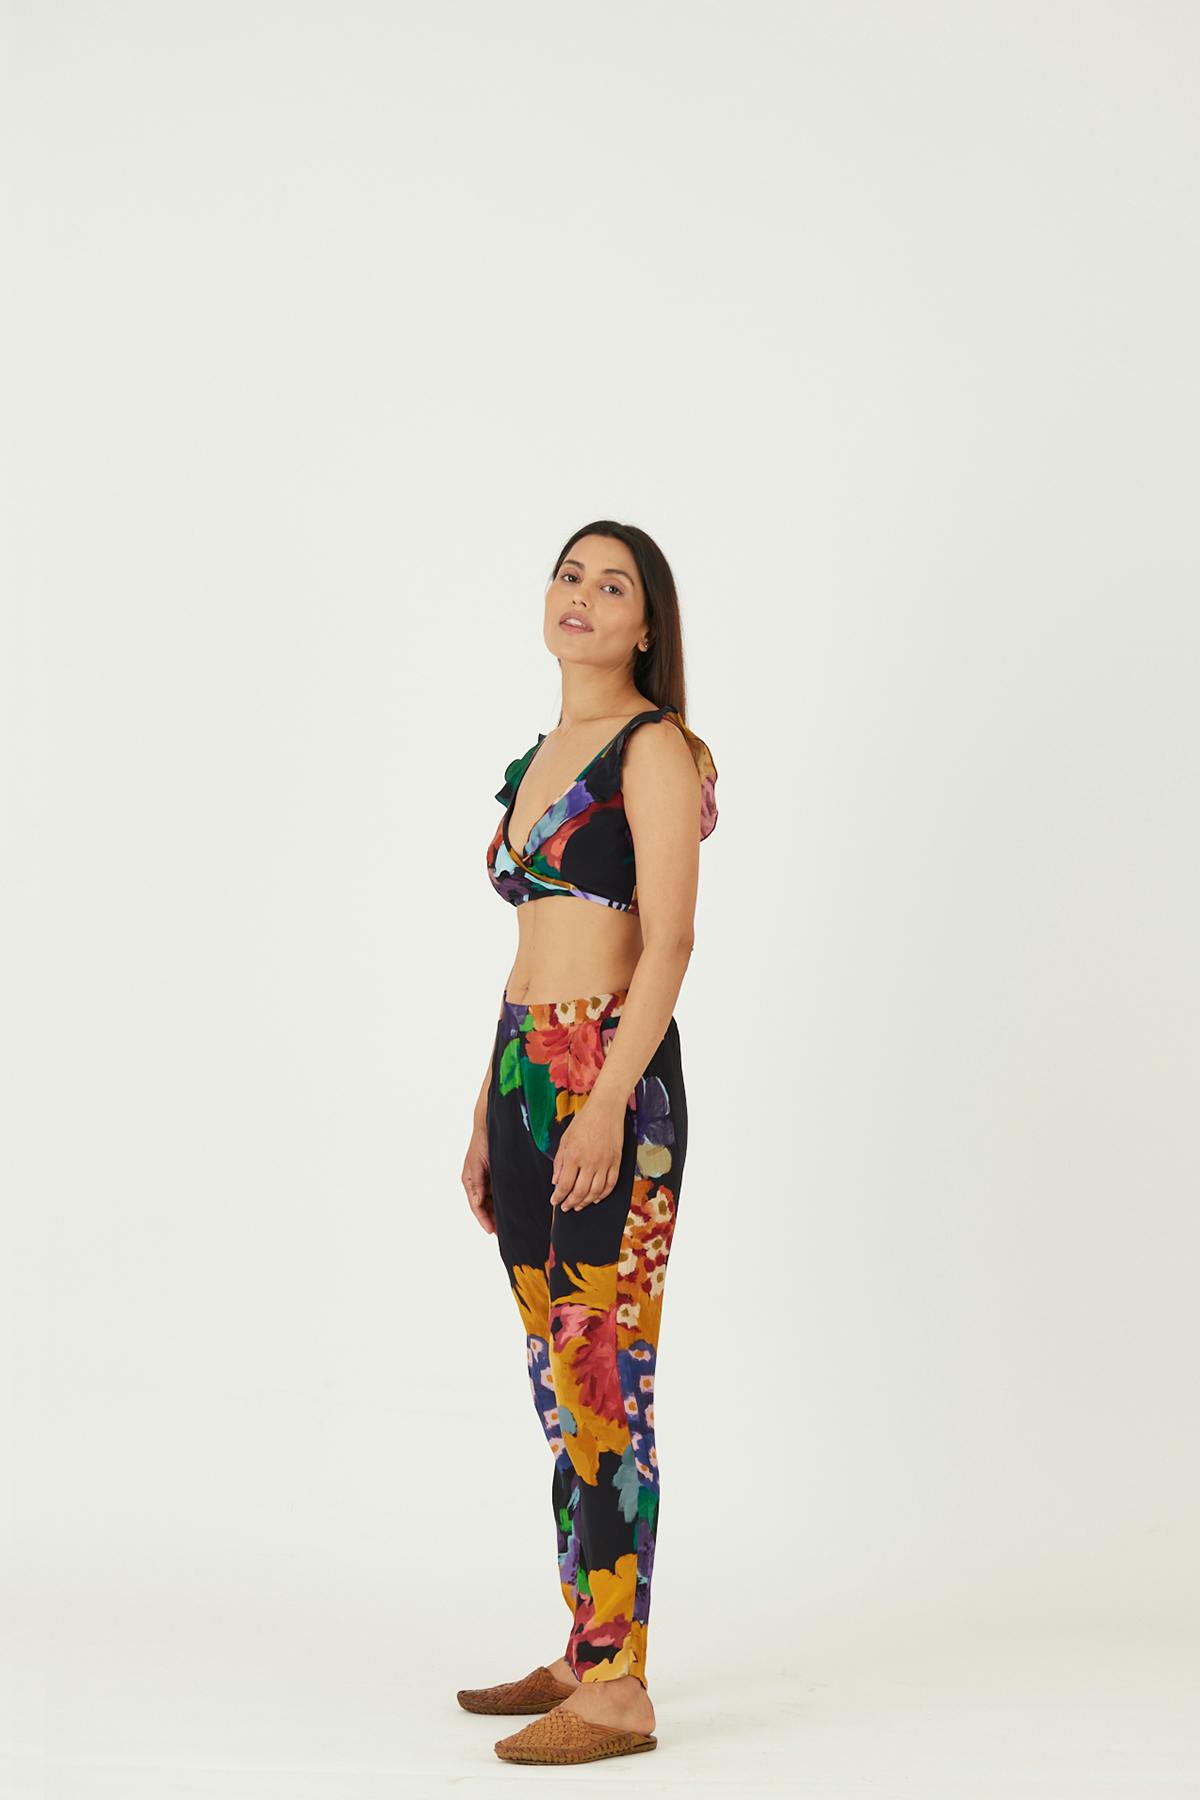 Additional image of FARAH BLACK BRALETTE & PANTS, a product by Yam India